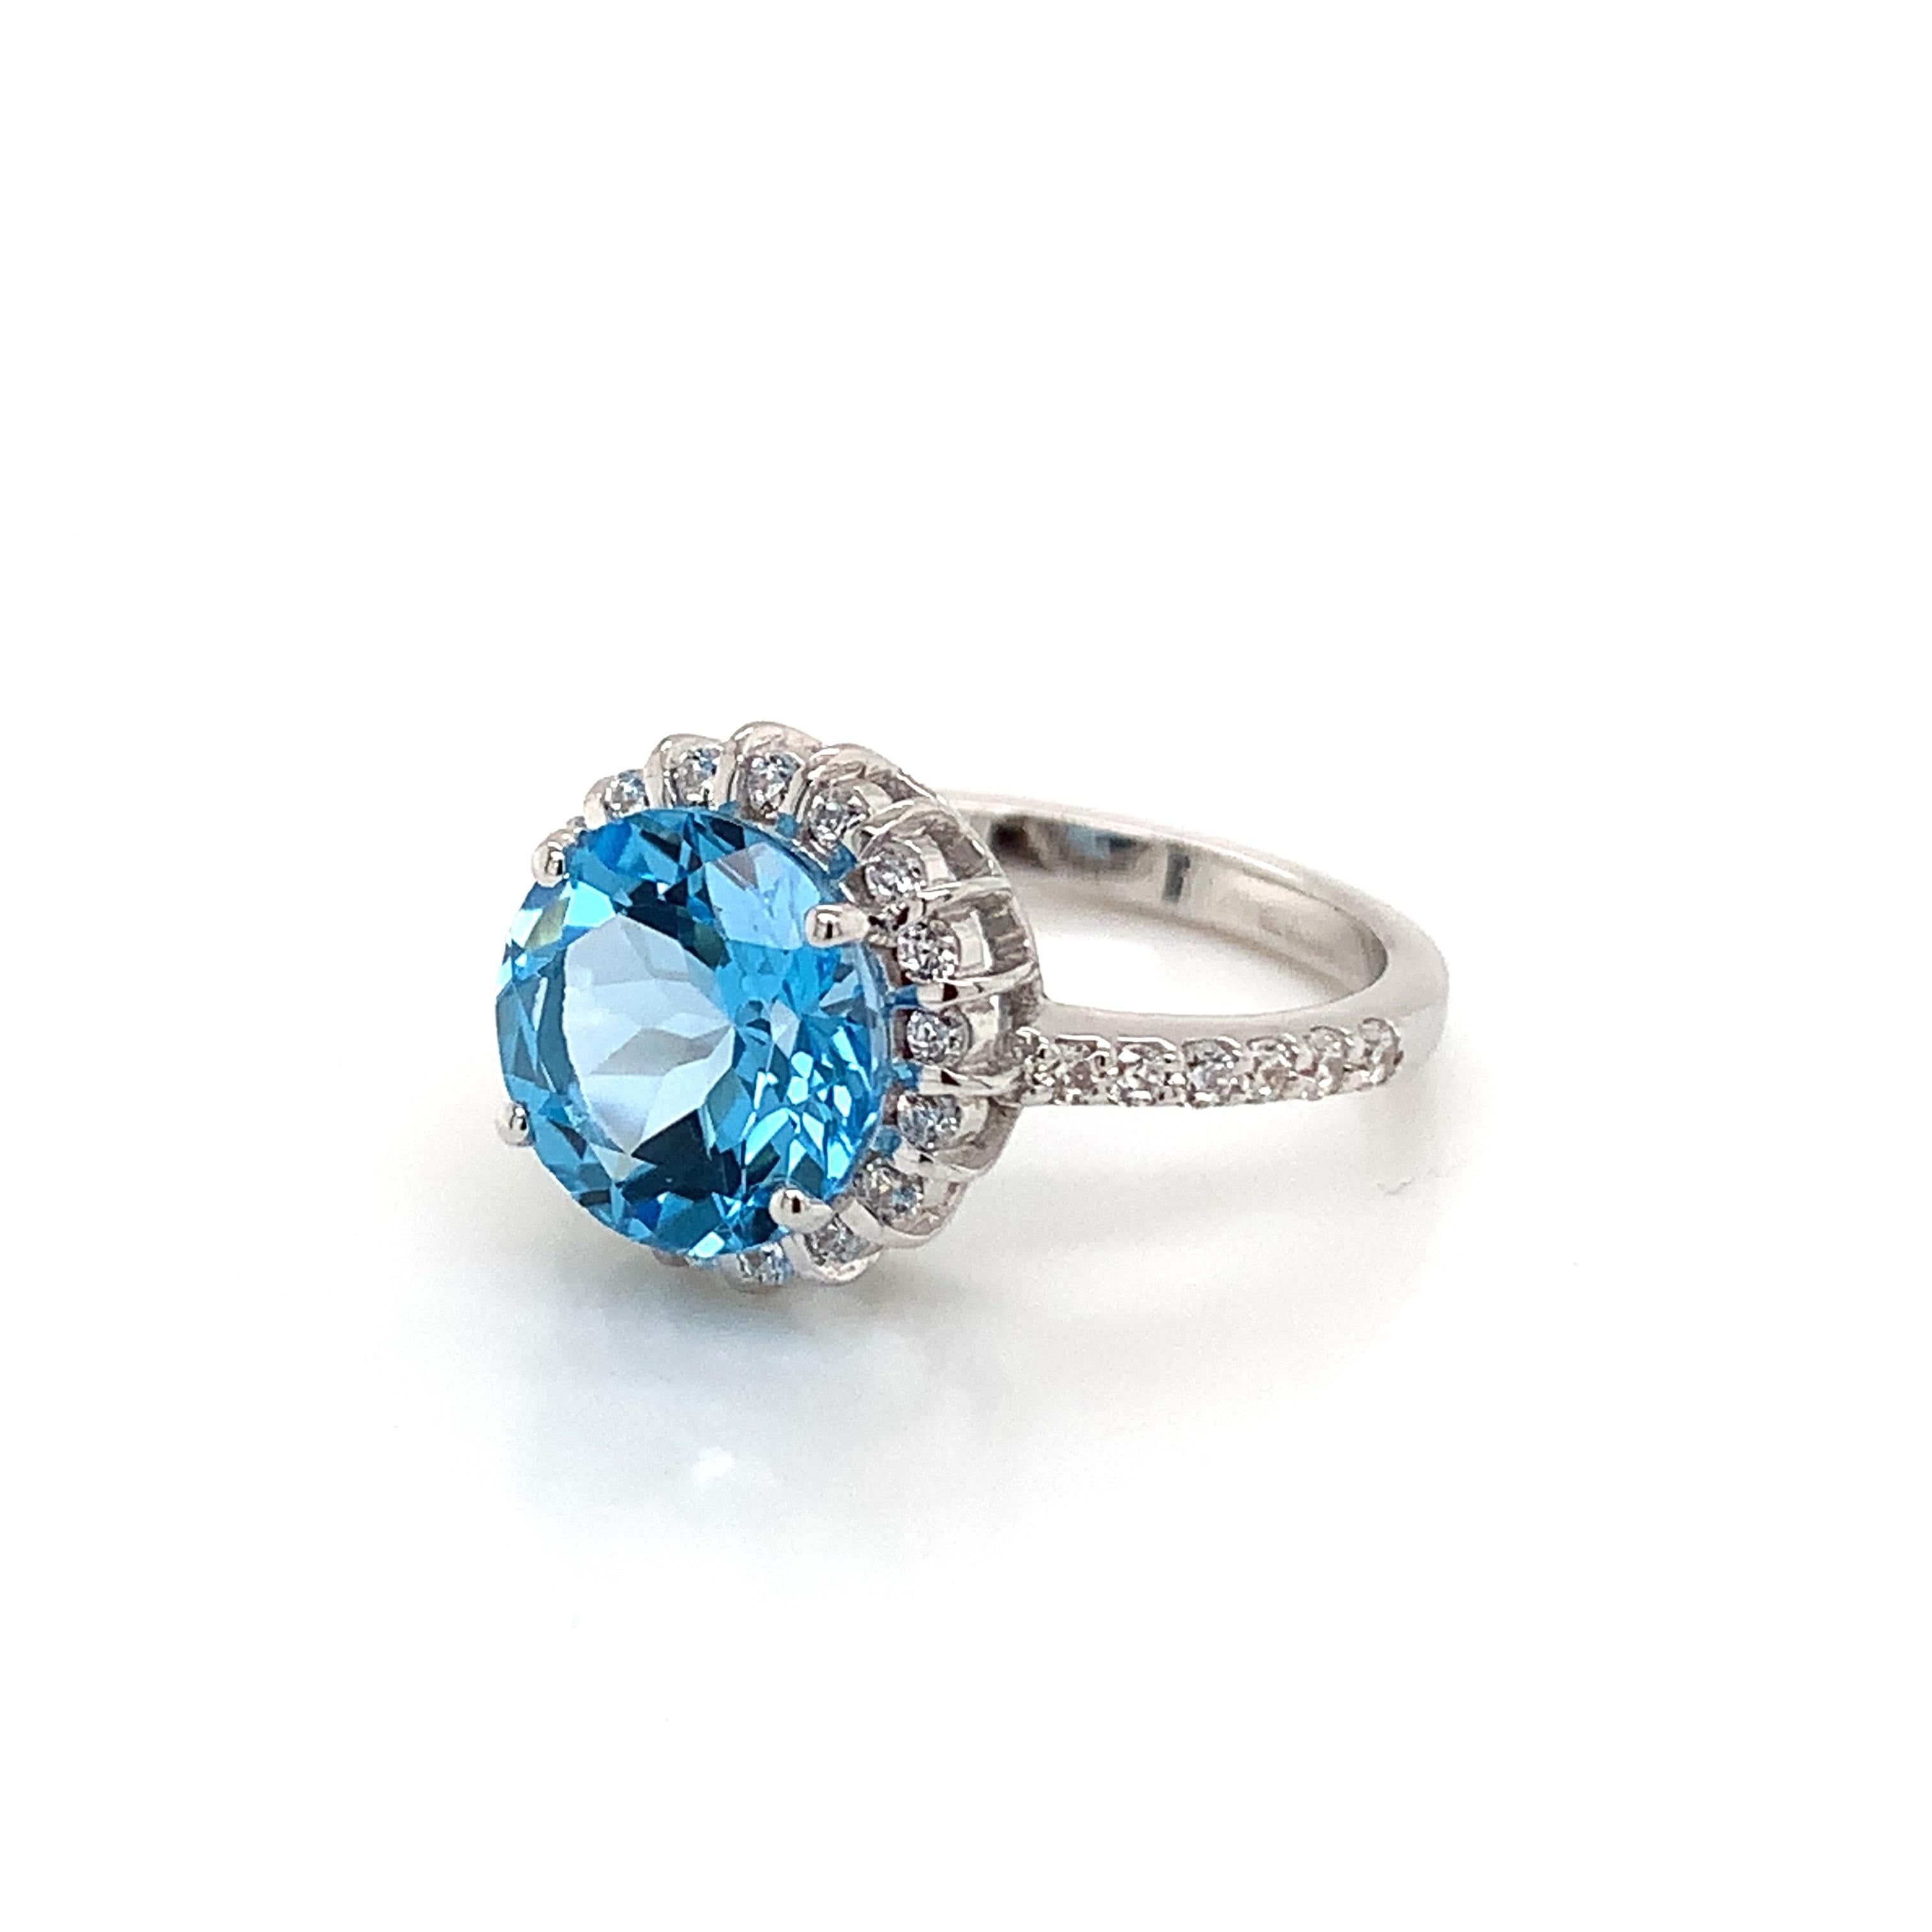 Round Shape Swiss Blue Topaz Gemstone beautifully crafted with CZ in a Ring. A fiery Blue color December Birthstone. For a special occasion like Engagement or Proposal or may be as a gift for a special person.

Primary Stone Size - 9x9mm